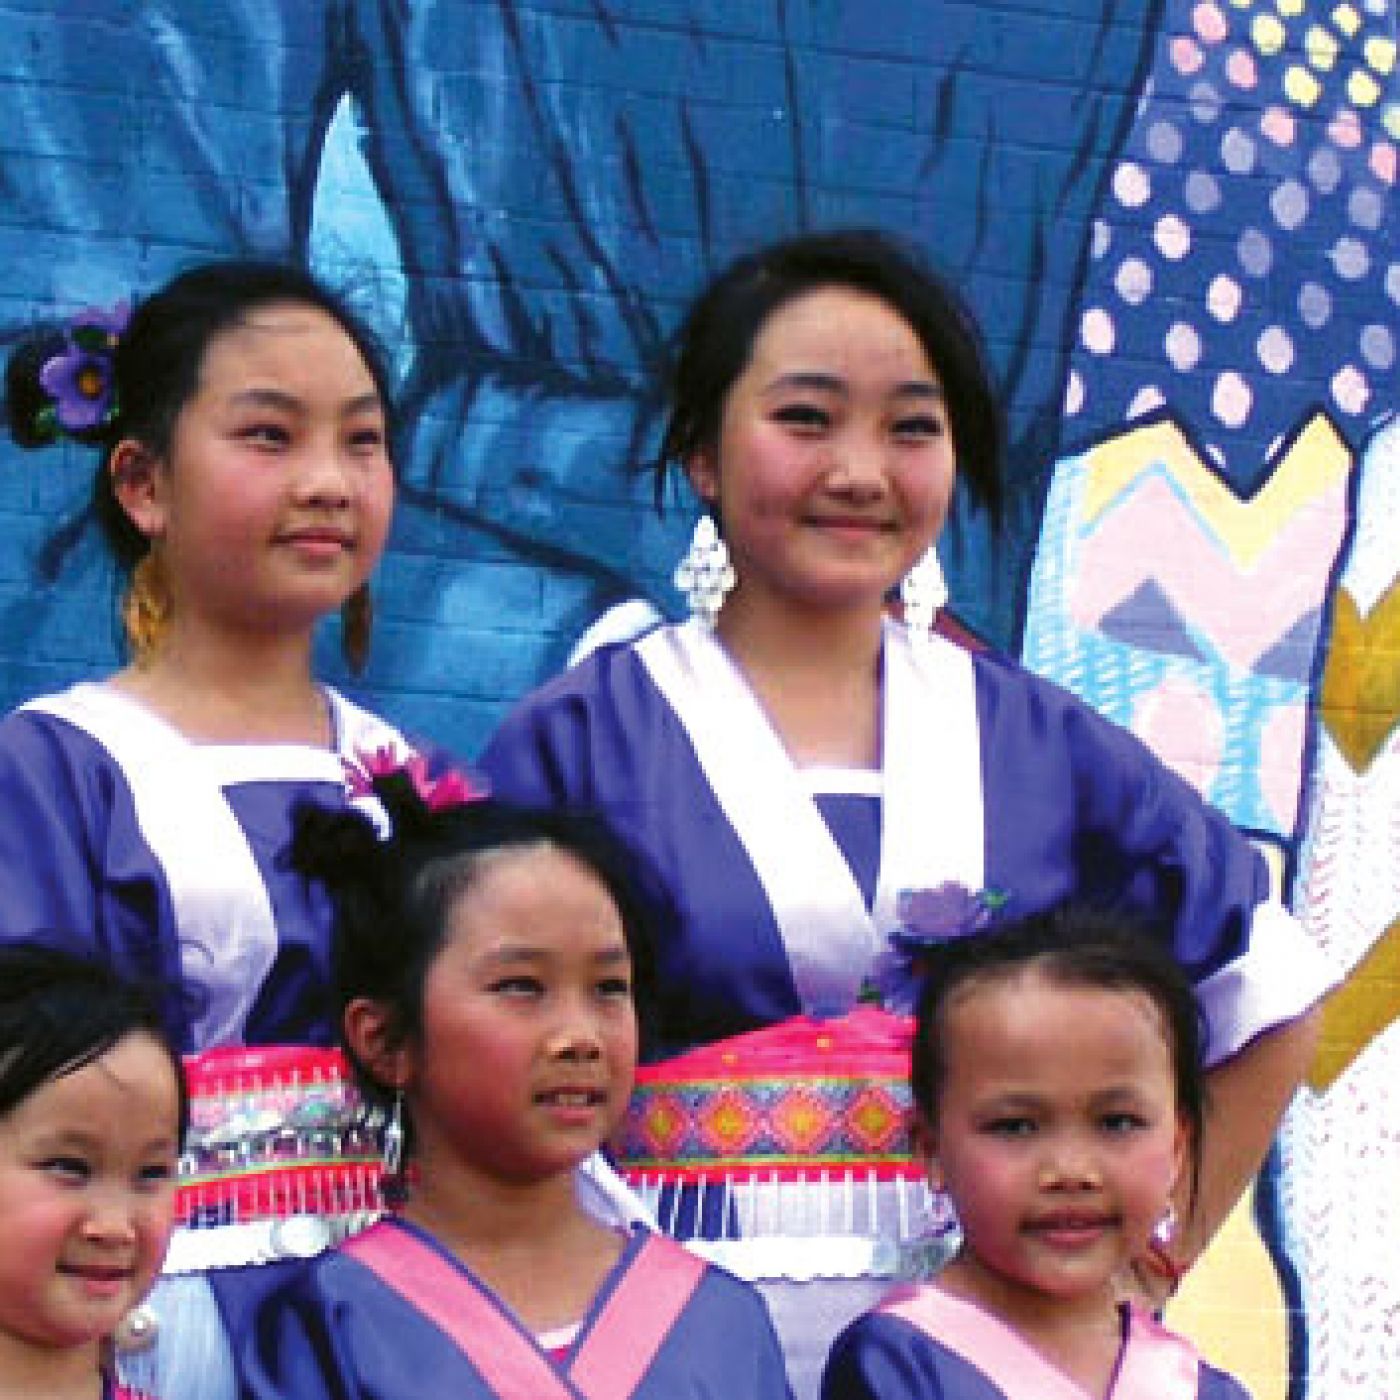 Young Hmong women in front of mural